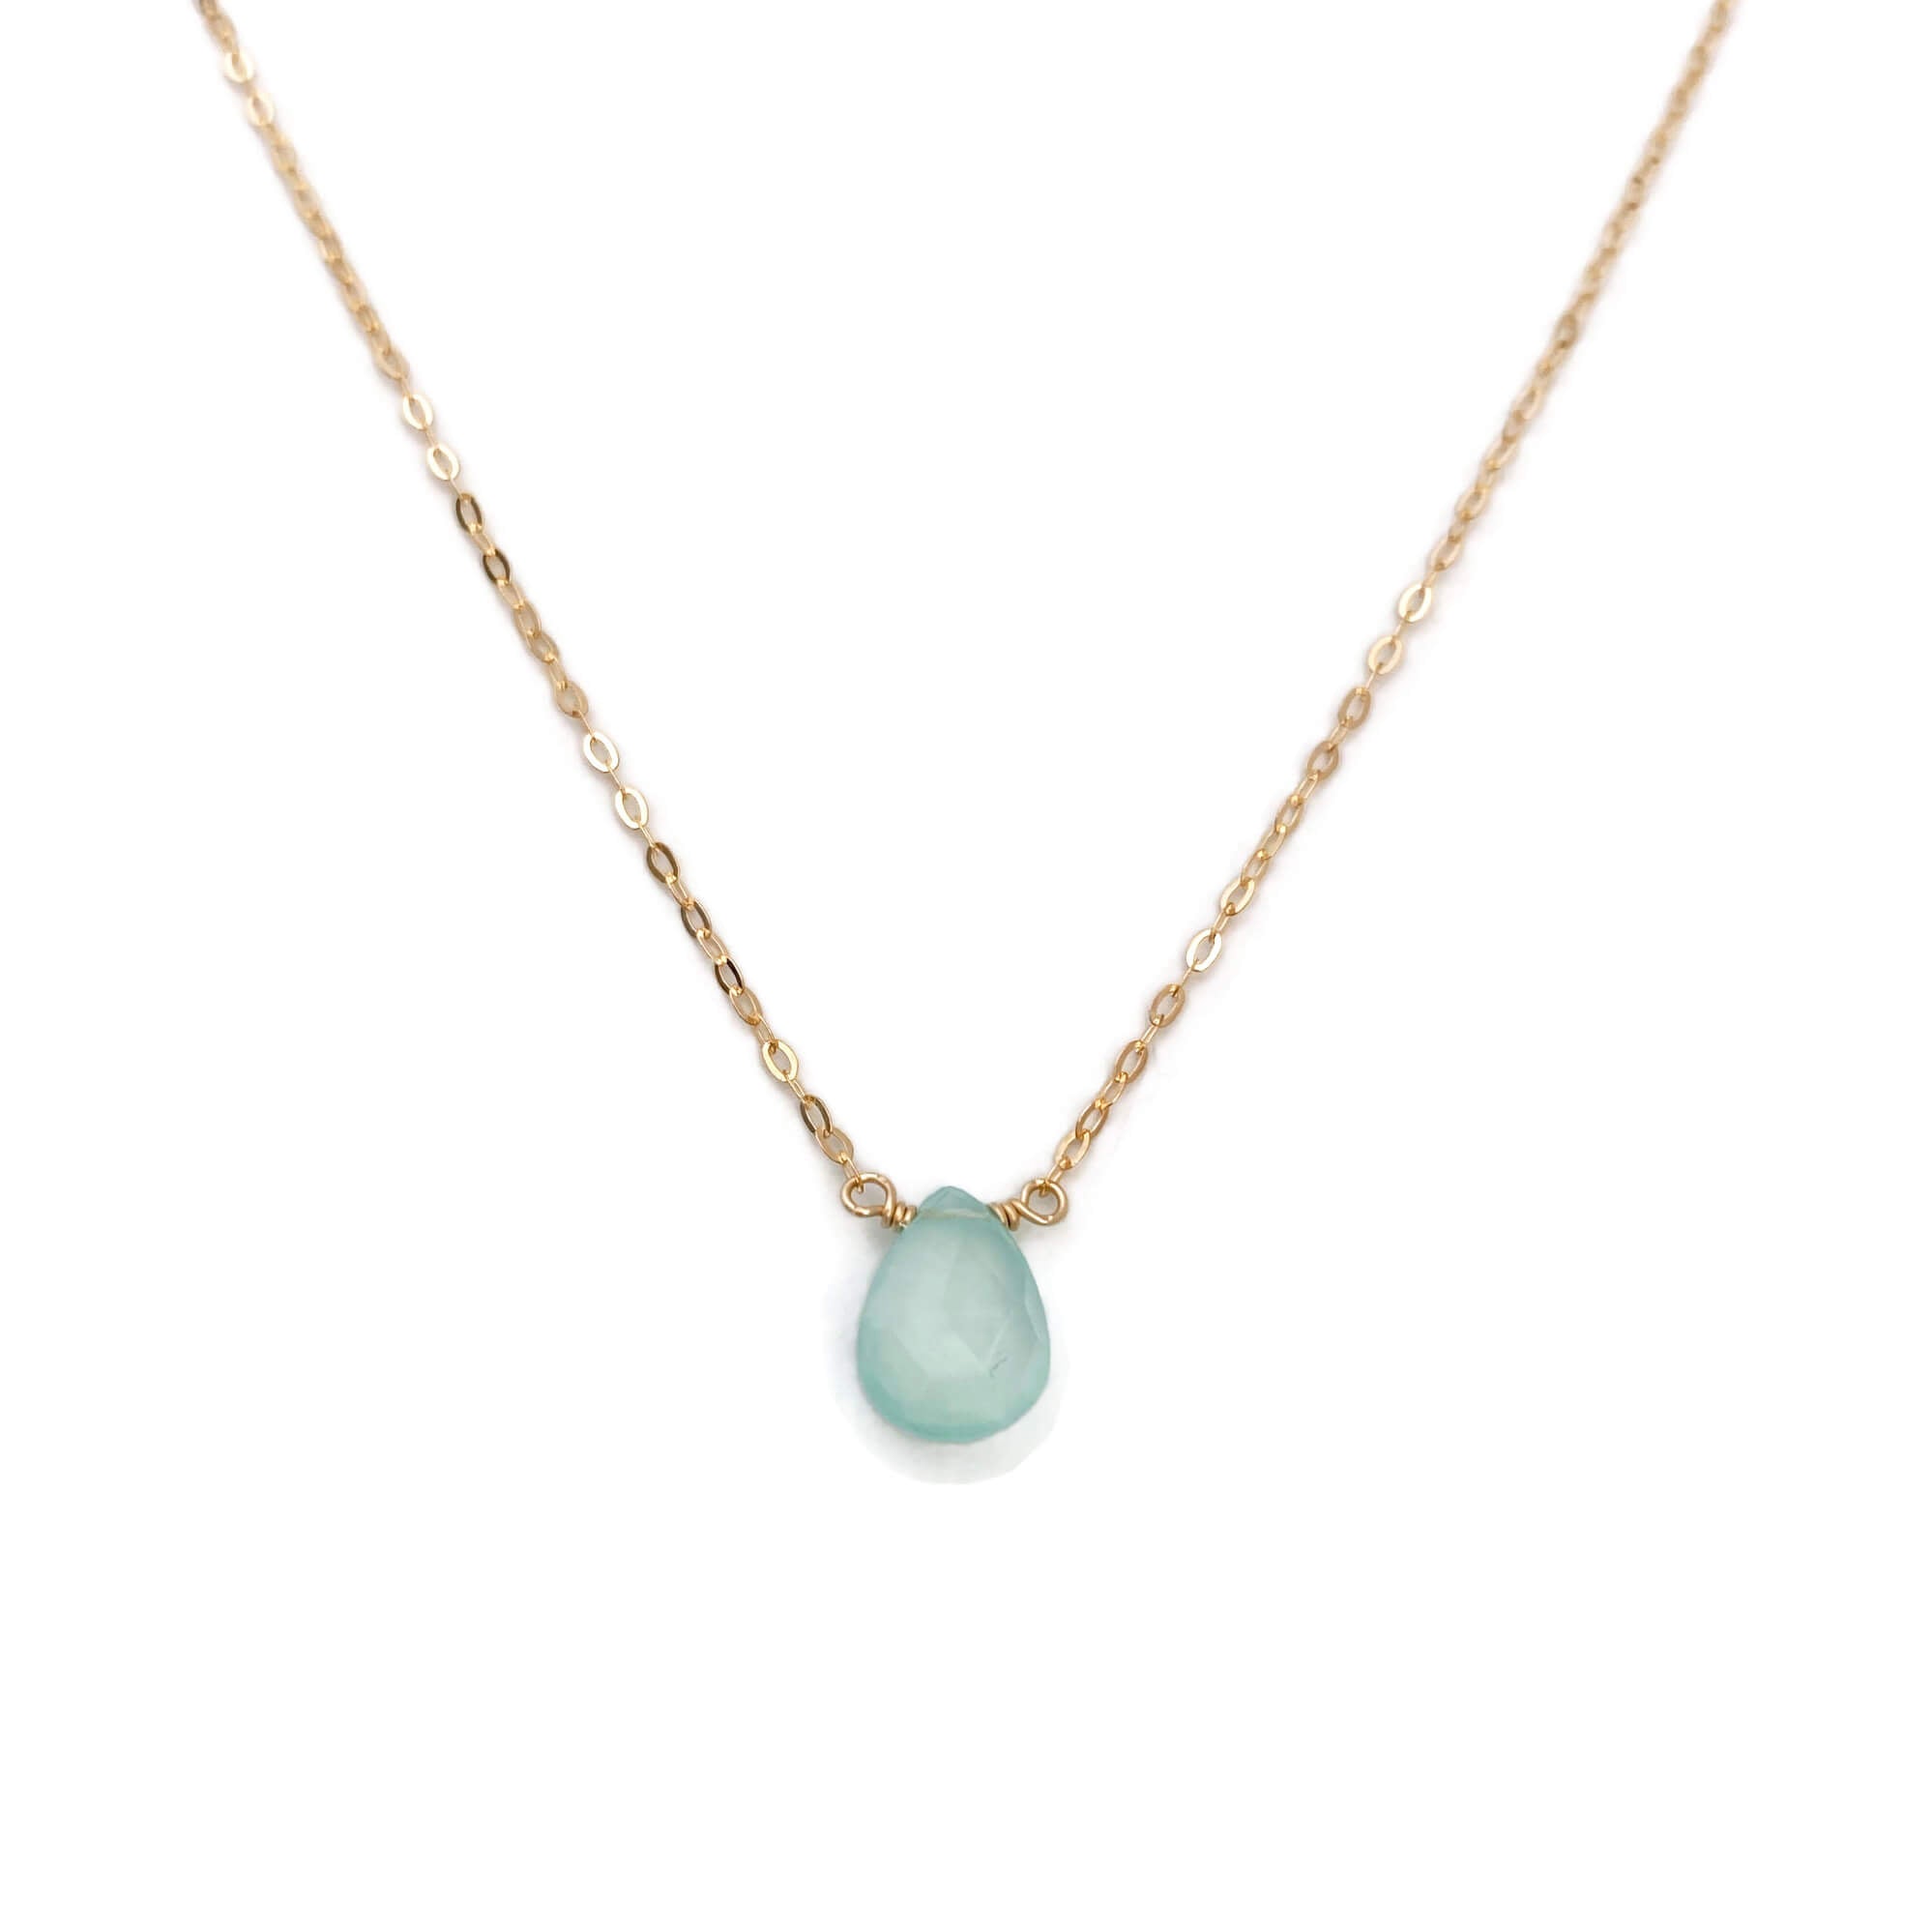 Blue Chalcedony and White Topaz Necklace – Reflections Fine Jewelry